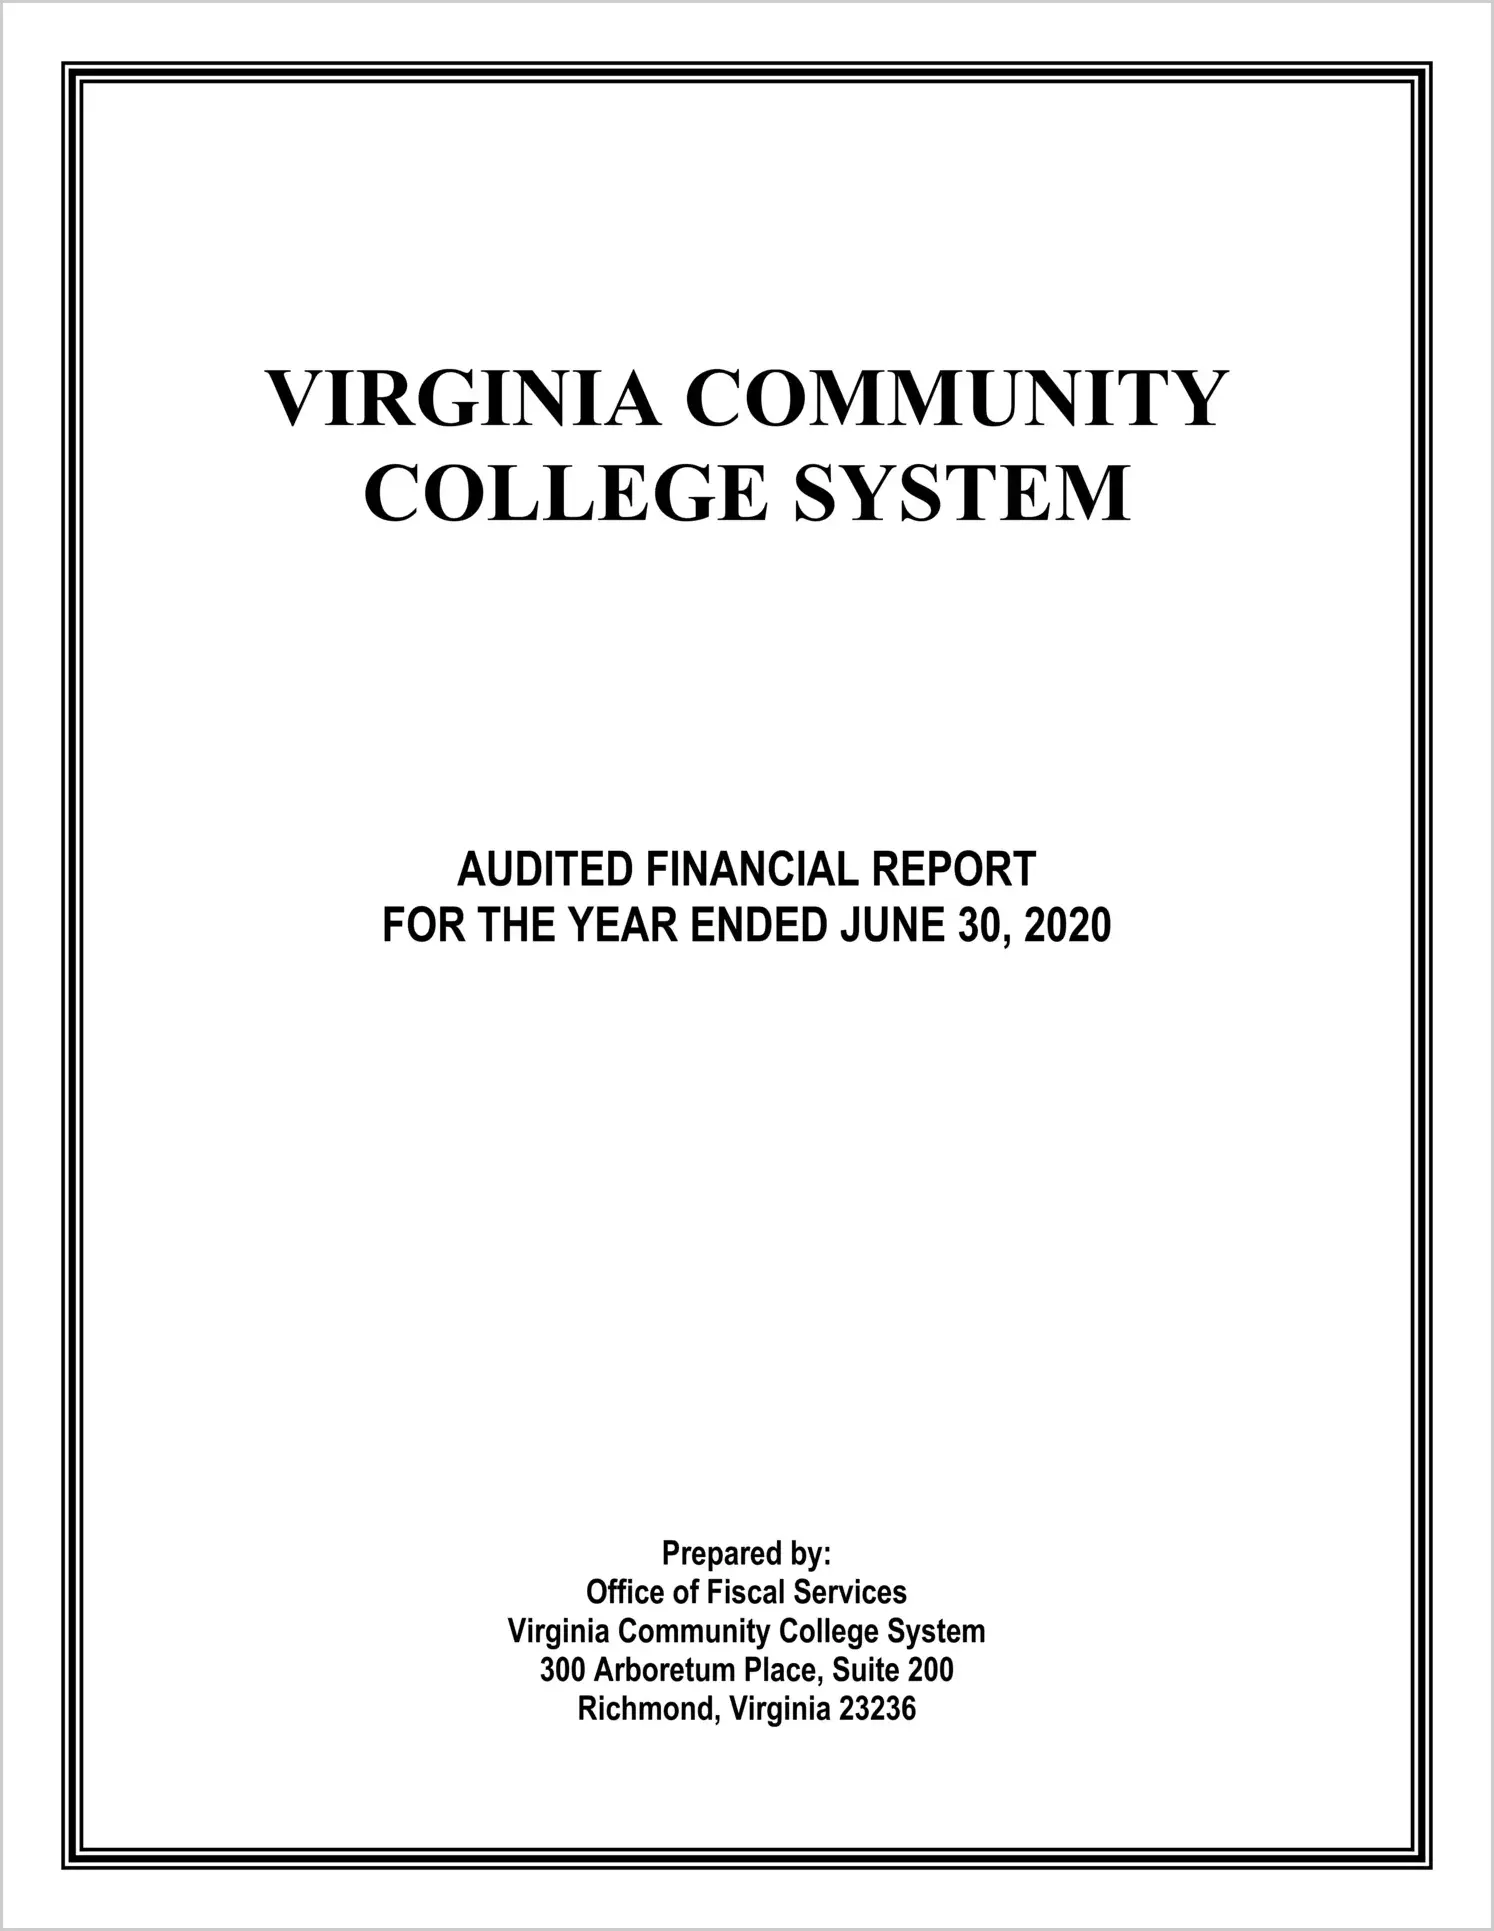 Virginia Community College System Financial Statements for the year ended June 30, 2020